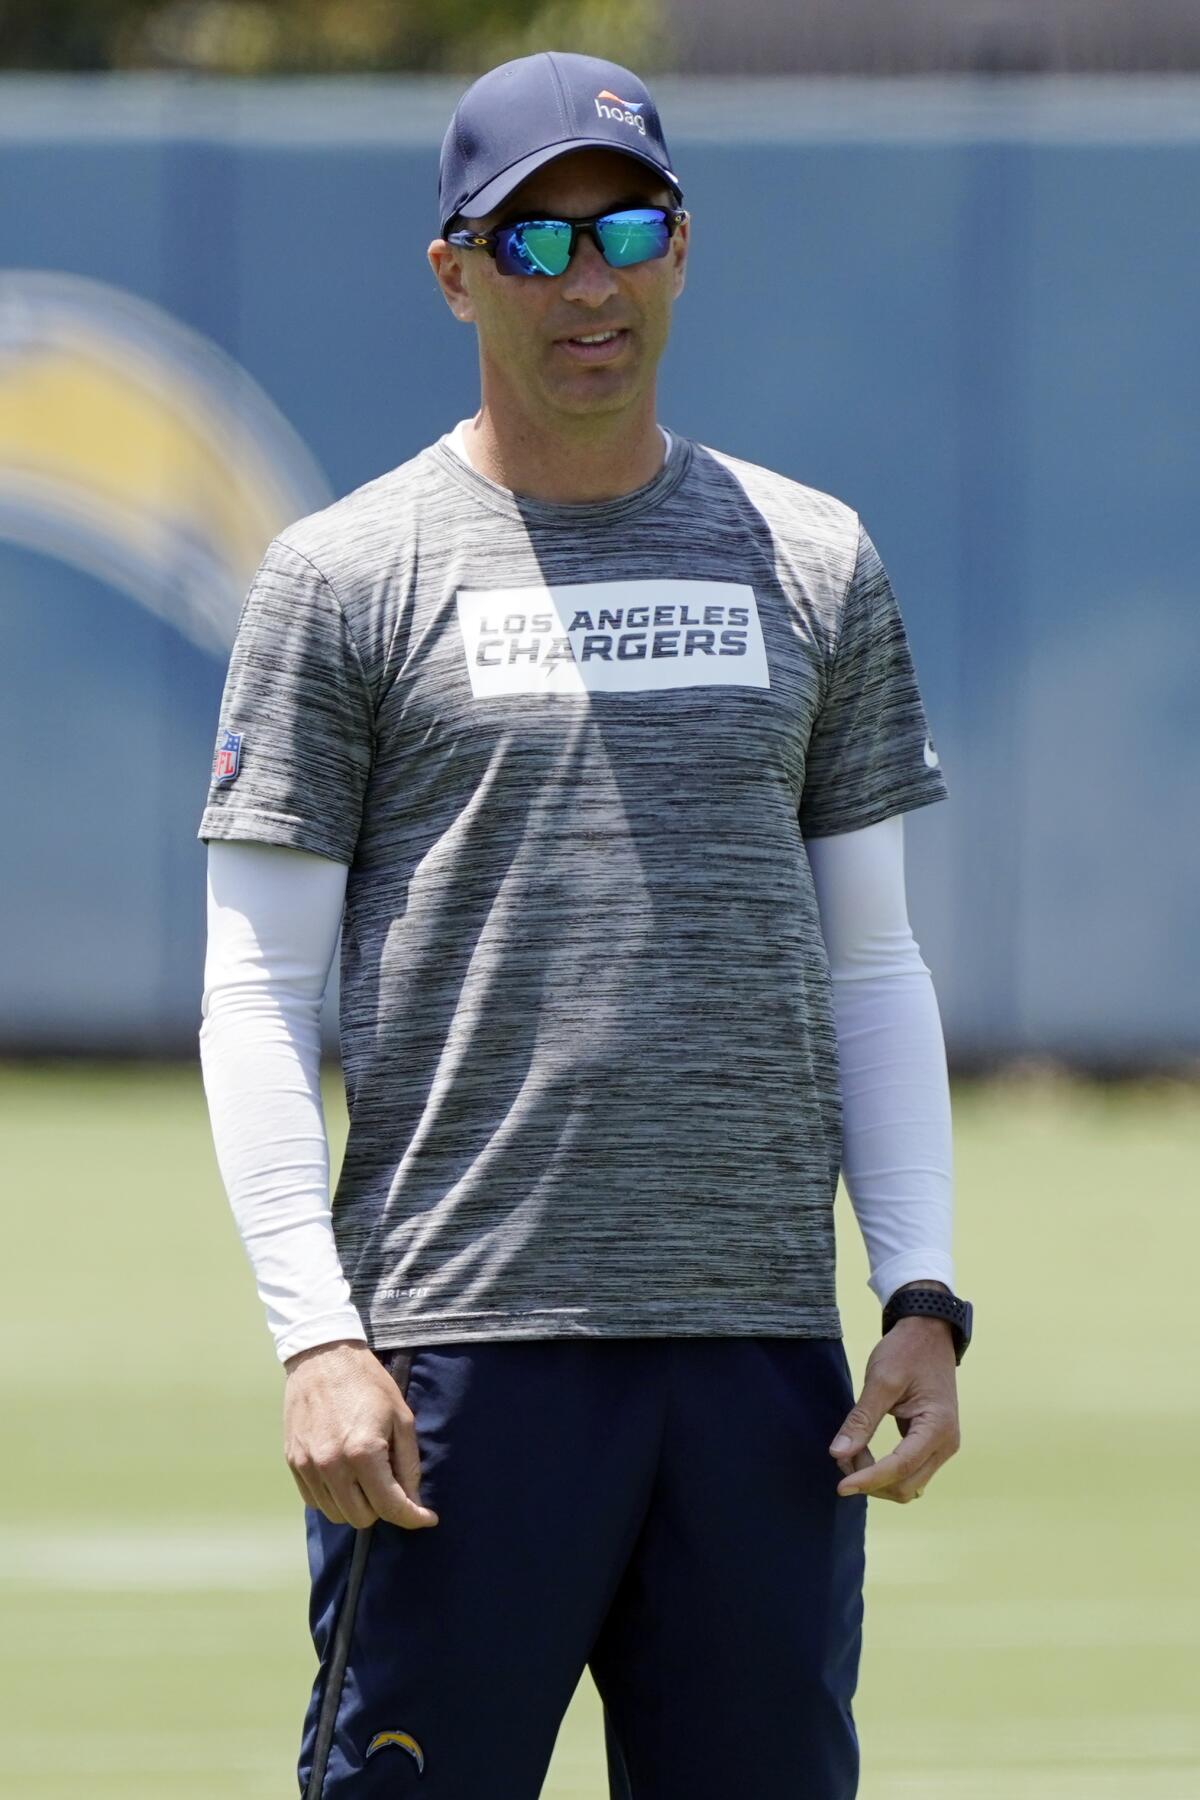  Chargers general manager Tom Telesco watches practice.